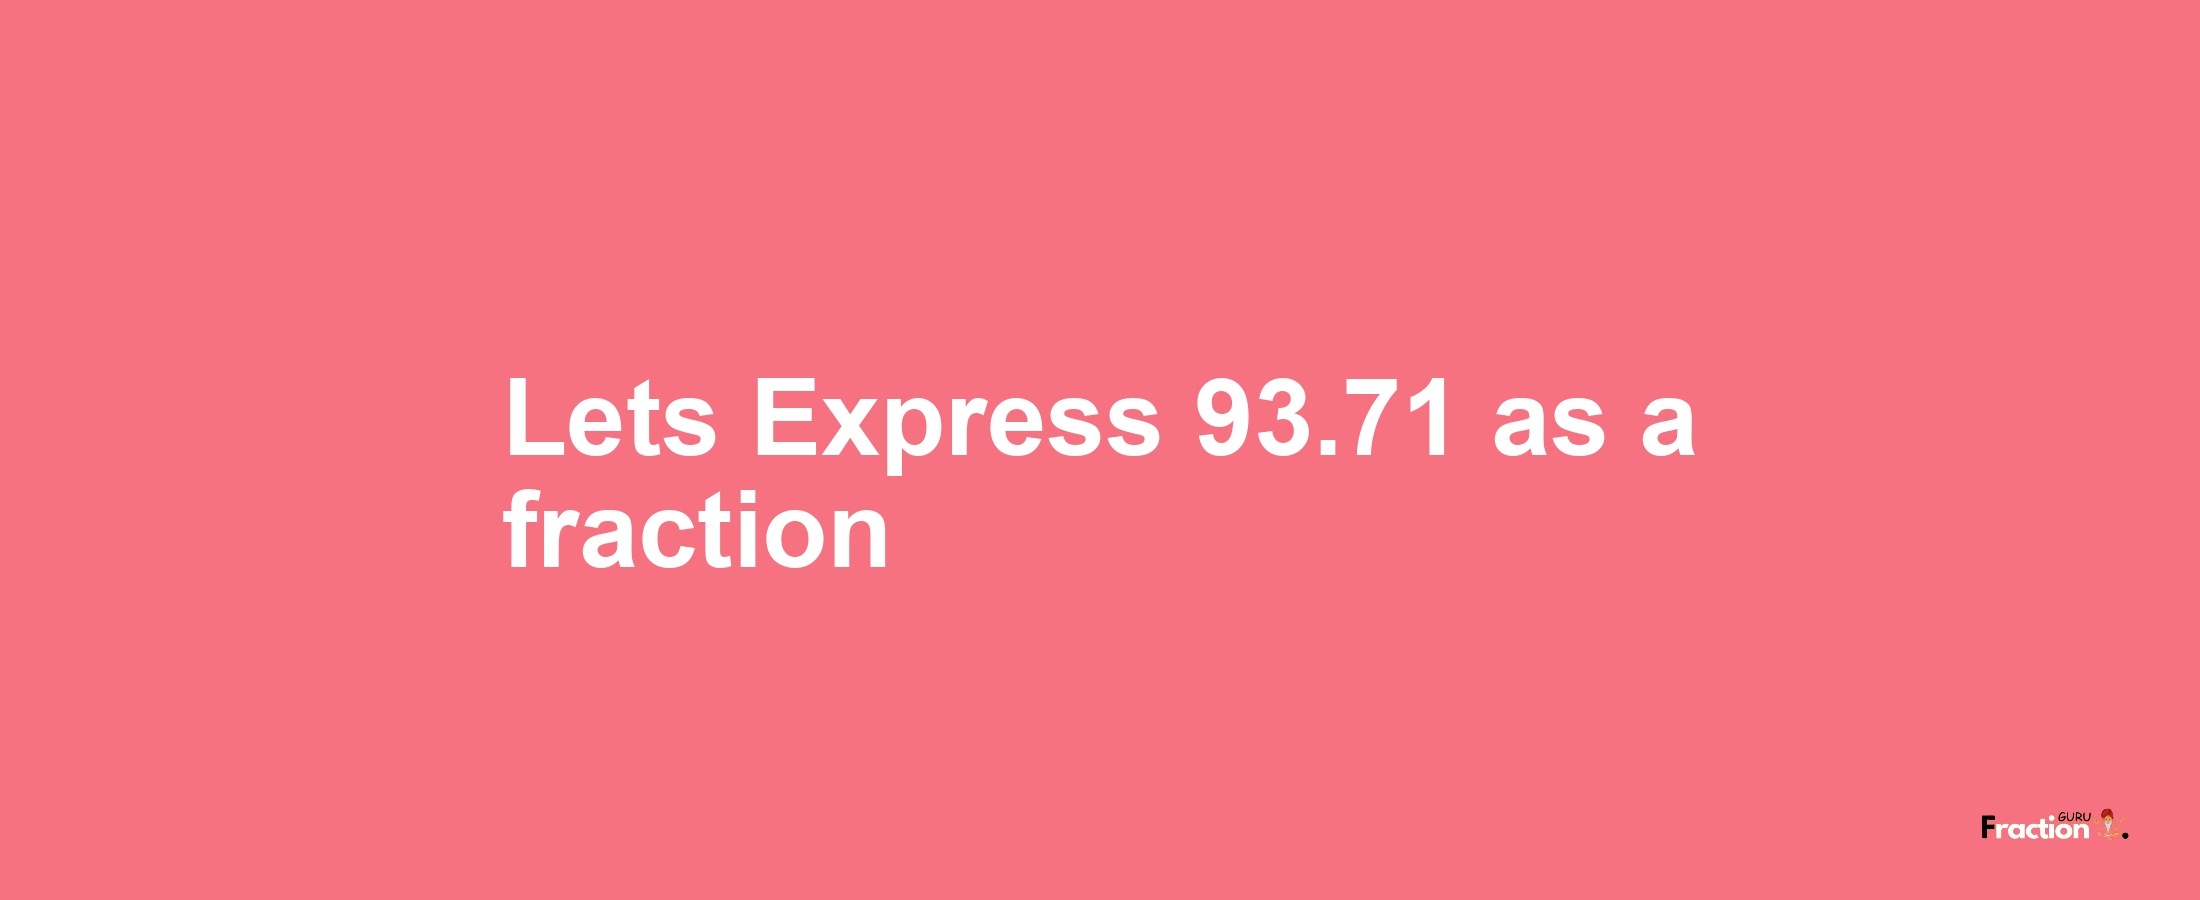 Lets Express 93.71 as afraction